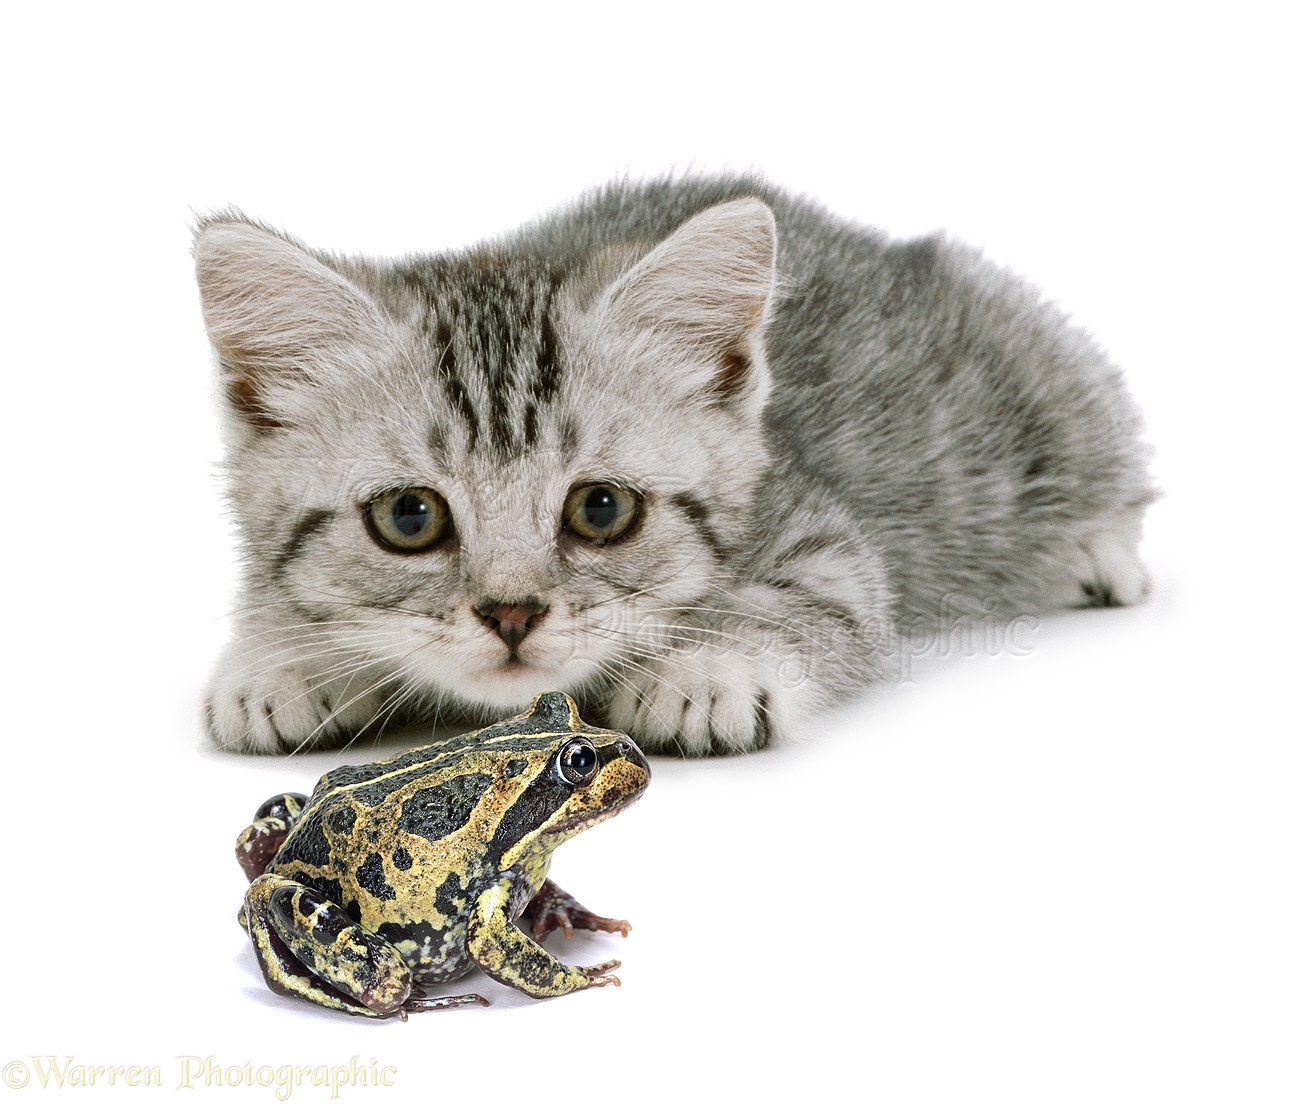 kittens and frogs